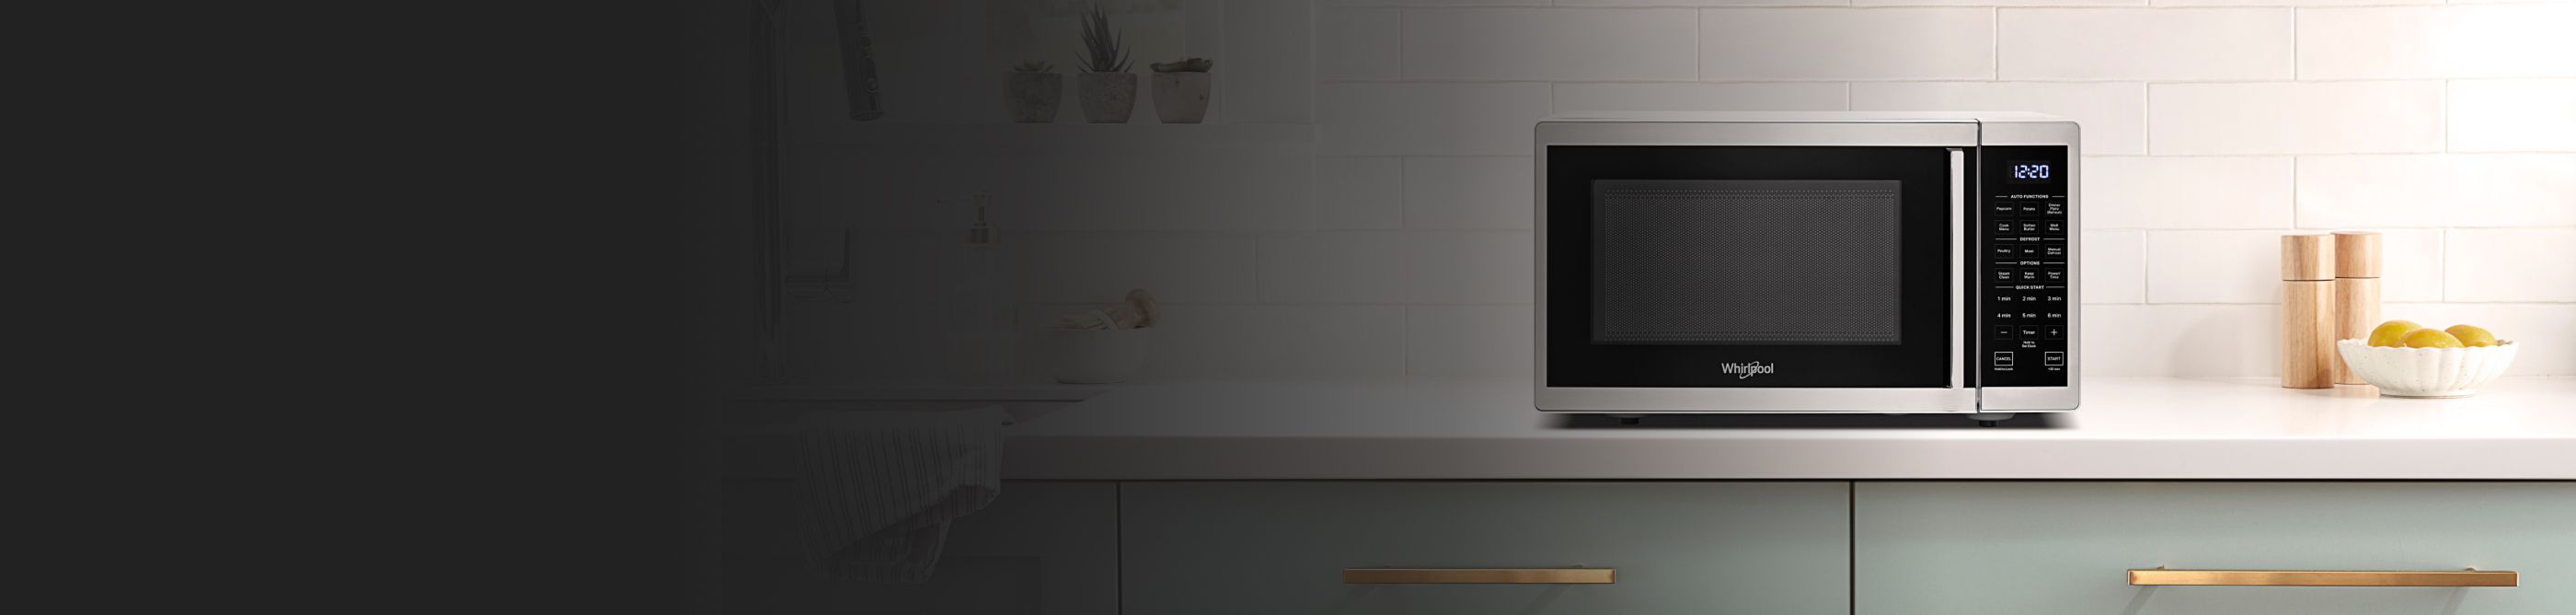 Countertop microwave on a white countertop